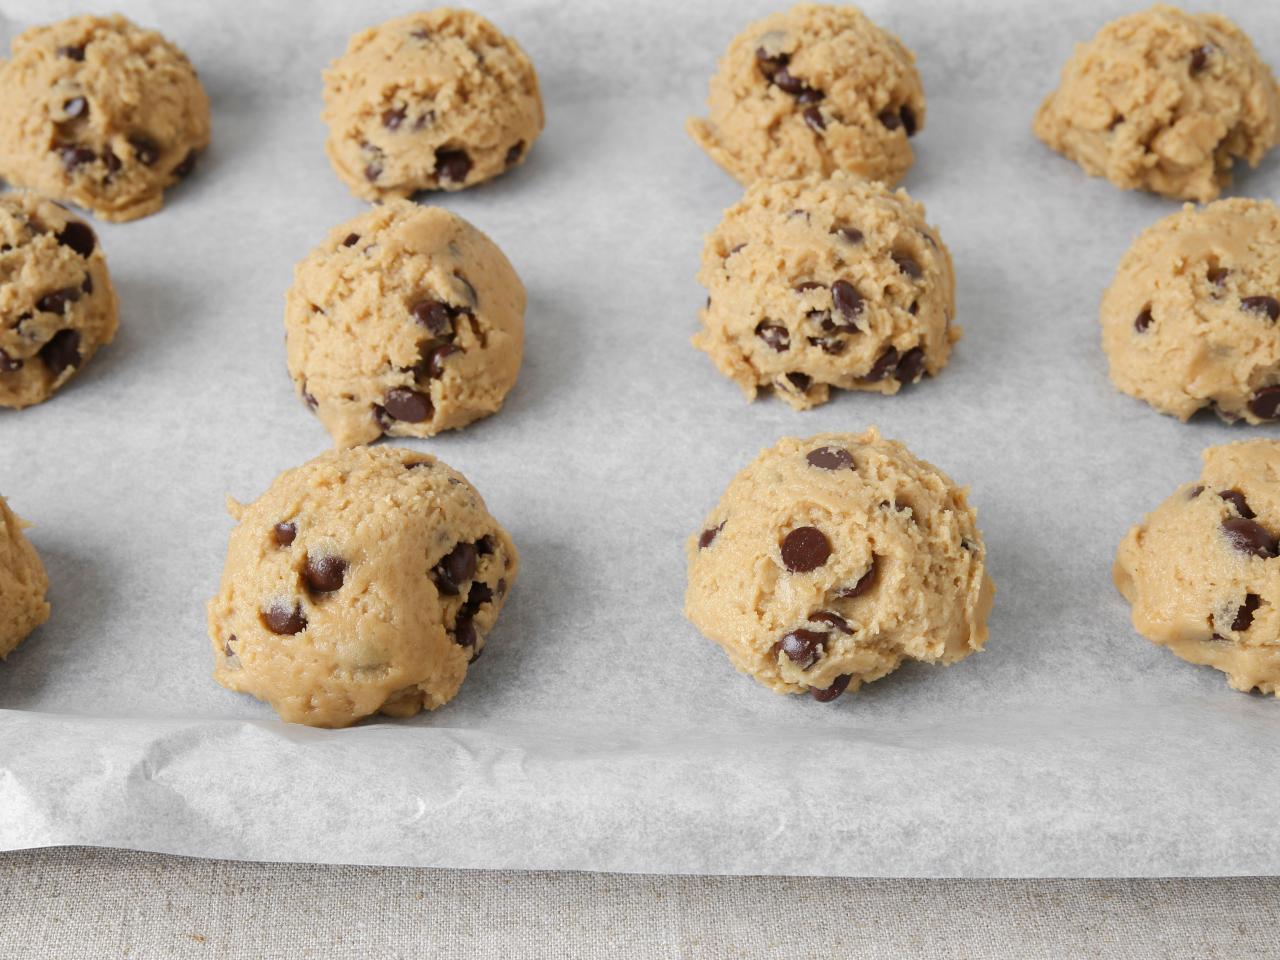 https://food.fnr.sndimg.com/content/dam/images/food/fullset/2021/08/16/raw-chocolate-chip-cookies-on-parchment-paper.jpg.rend.hgtvcom.1280.960.suffix/1629134529774.jpeg